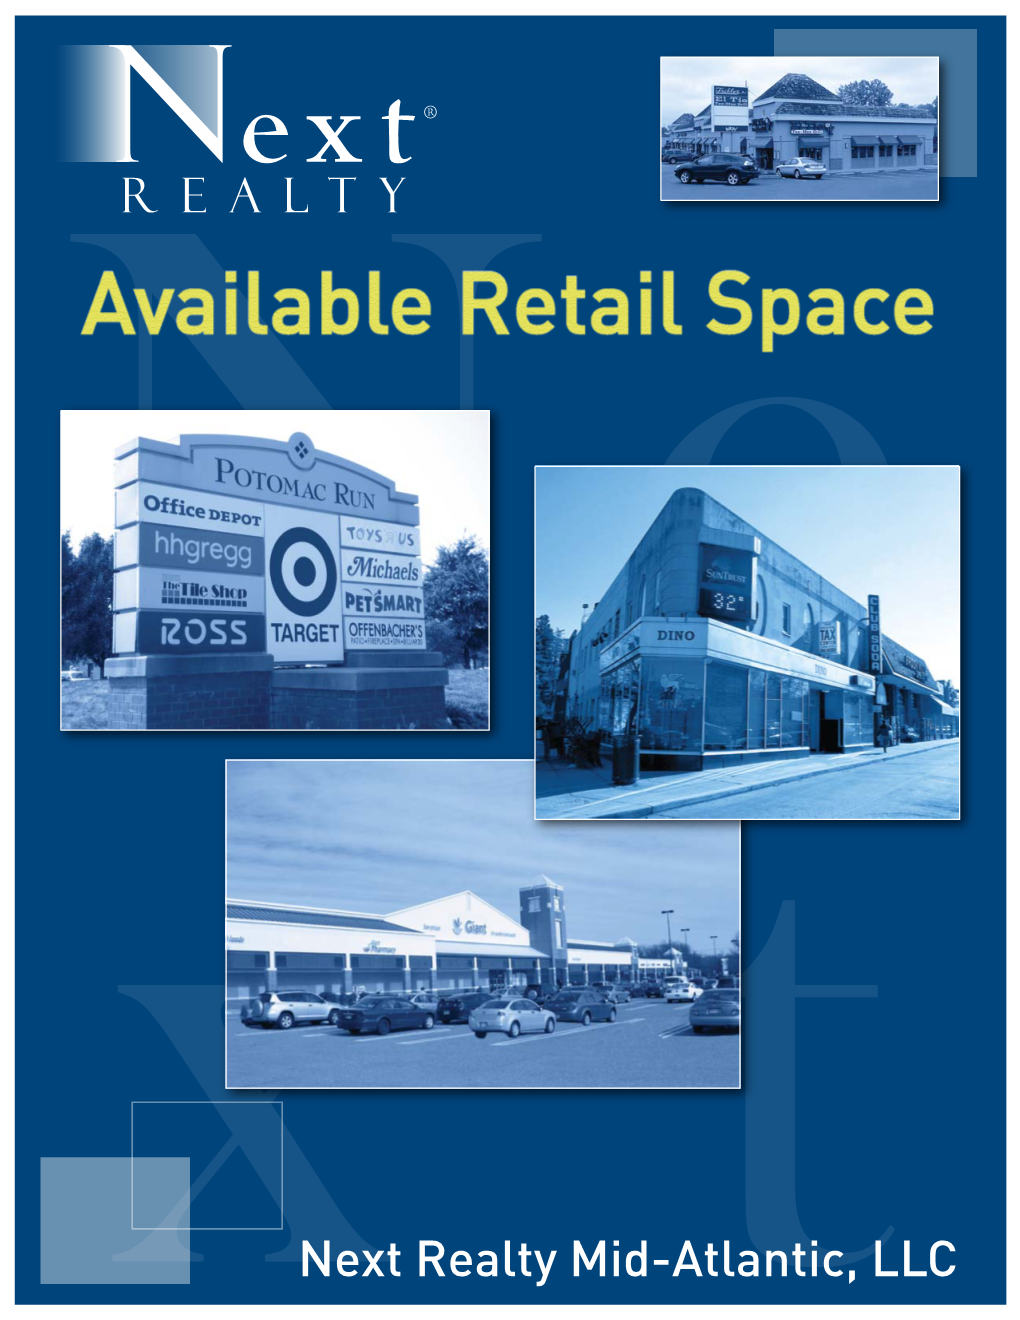 NEW NMA-Retail Space EMAIL